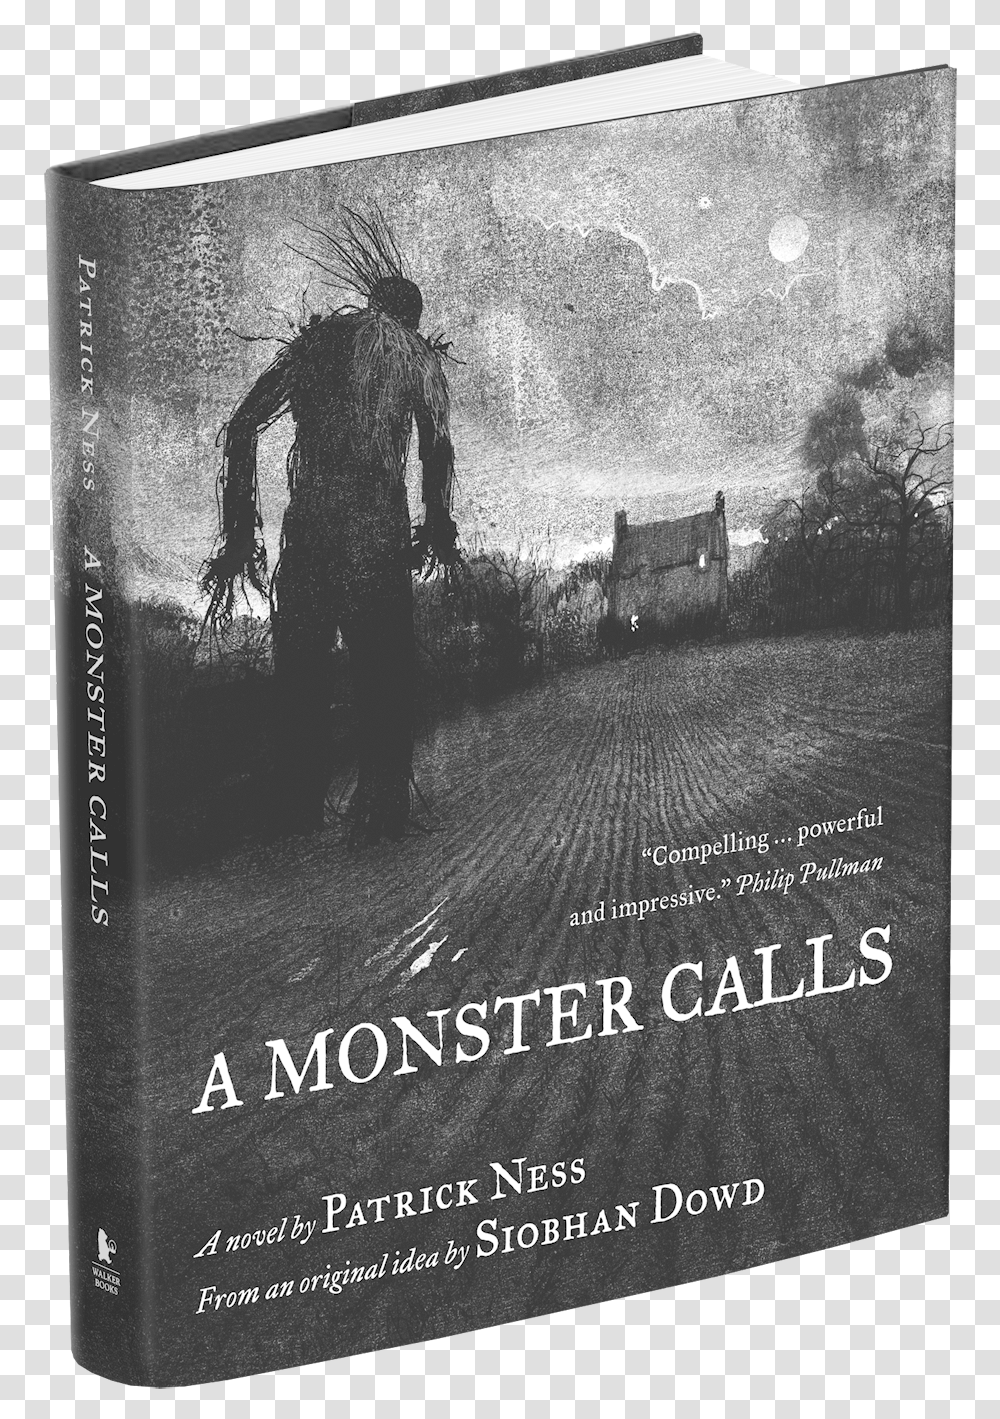 Purple And Gold Book Spine Monster Calls By Patrick Ness Pdf, Person, Human, Poster, Advertisement Transparent Png